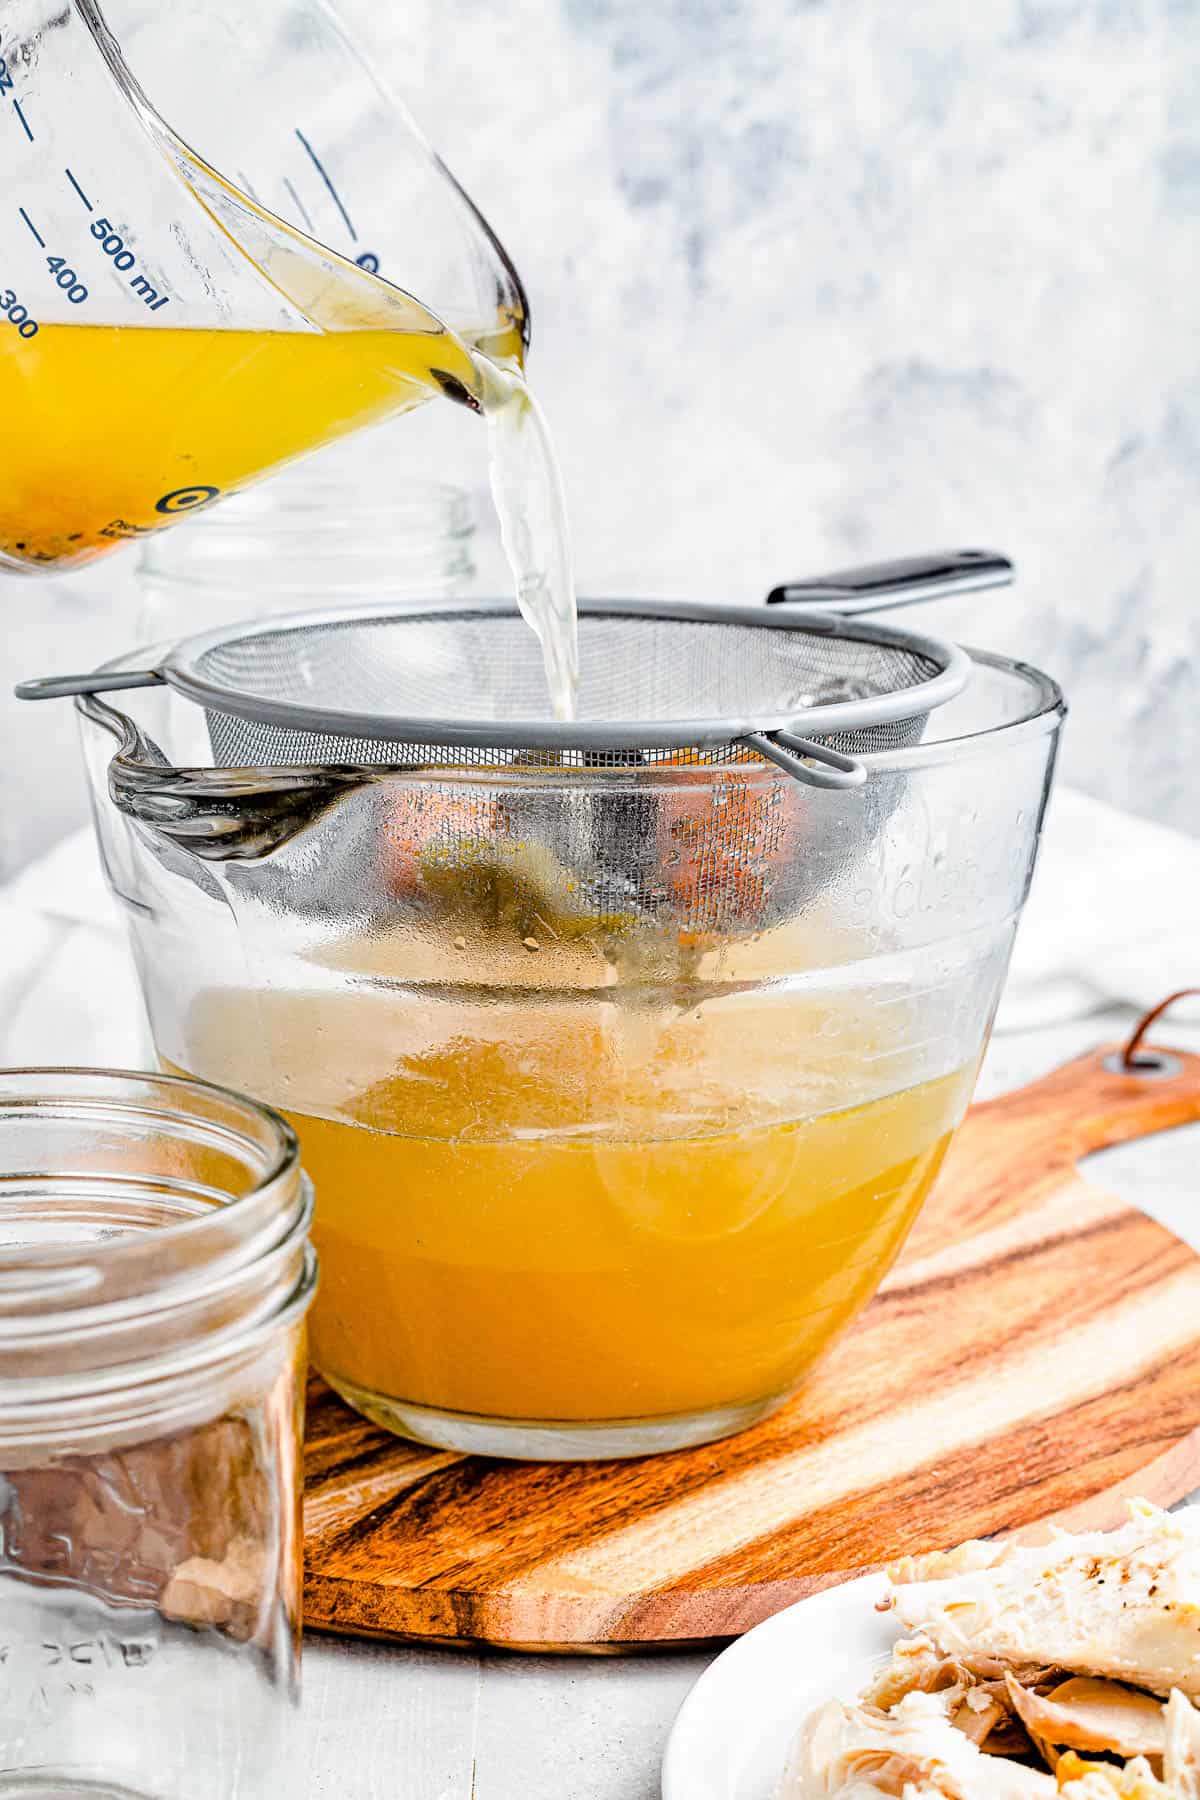 Chicken broth being poured from a large measuring cup into a bowl through a large sieve.